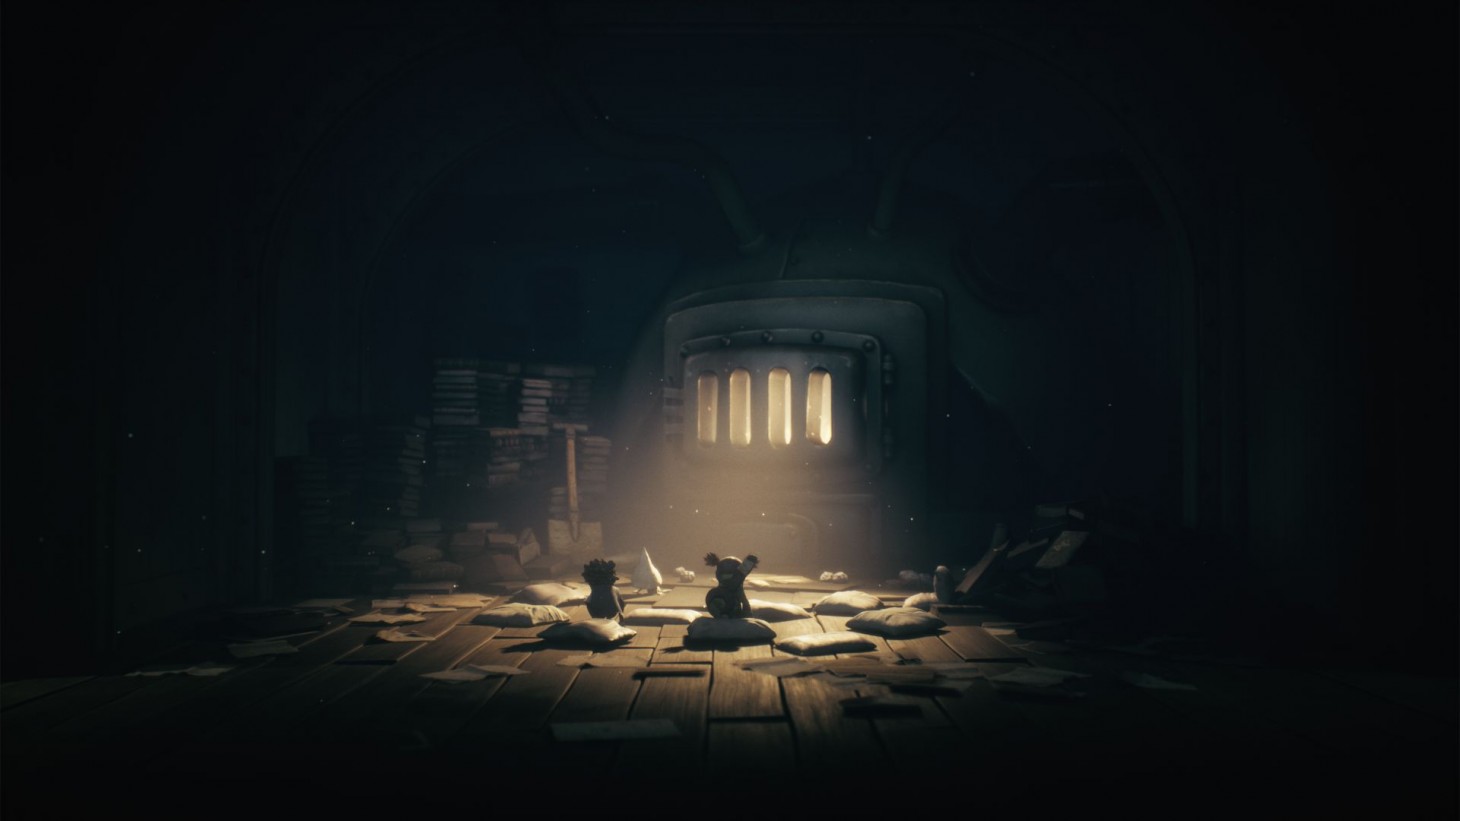 Little Nightmares 3, release date speculation, and pre-order news